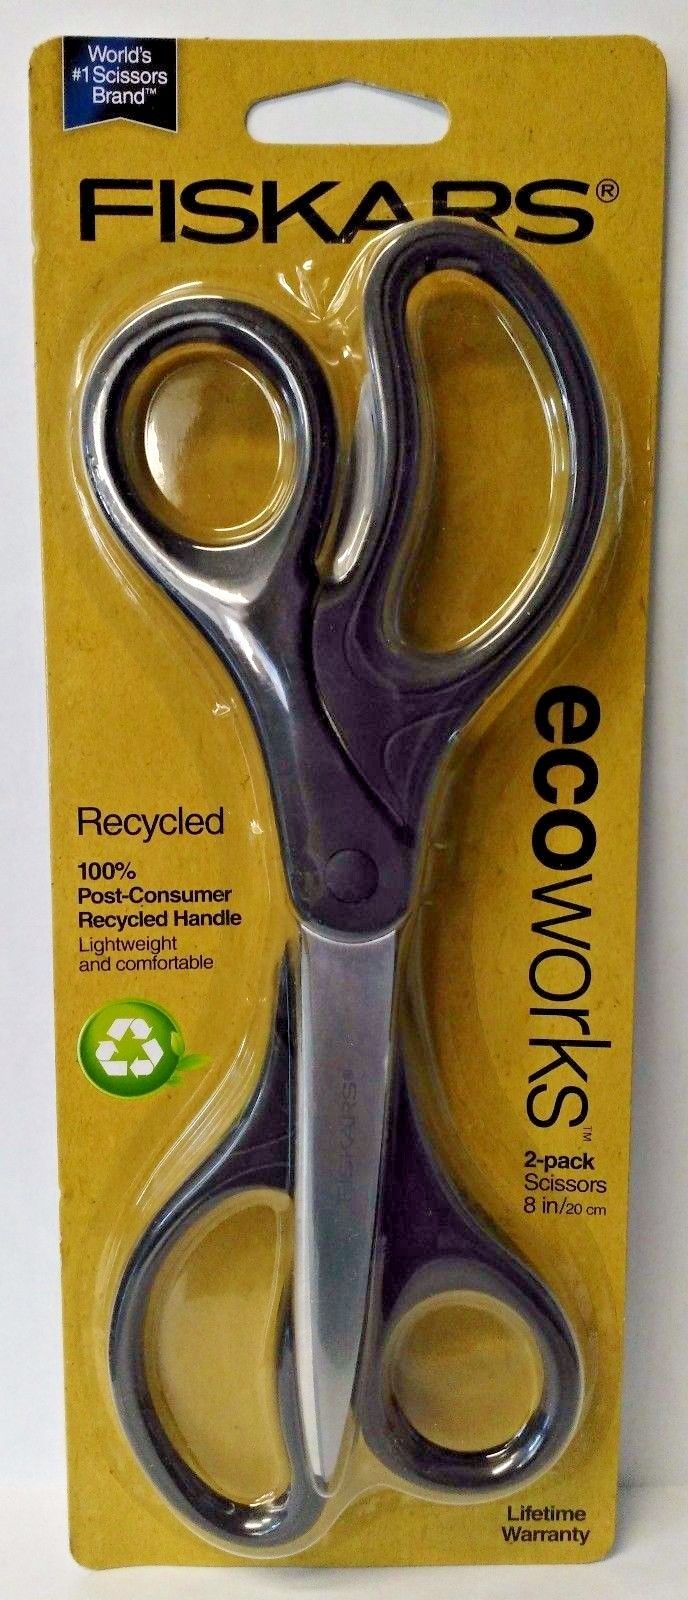 Lot of 8 All-Purpose Scissors - 8 Stainless Steel - Home, Office